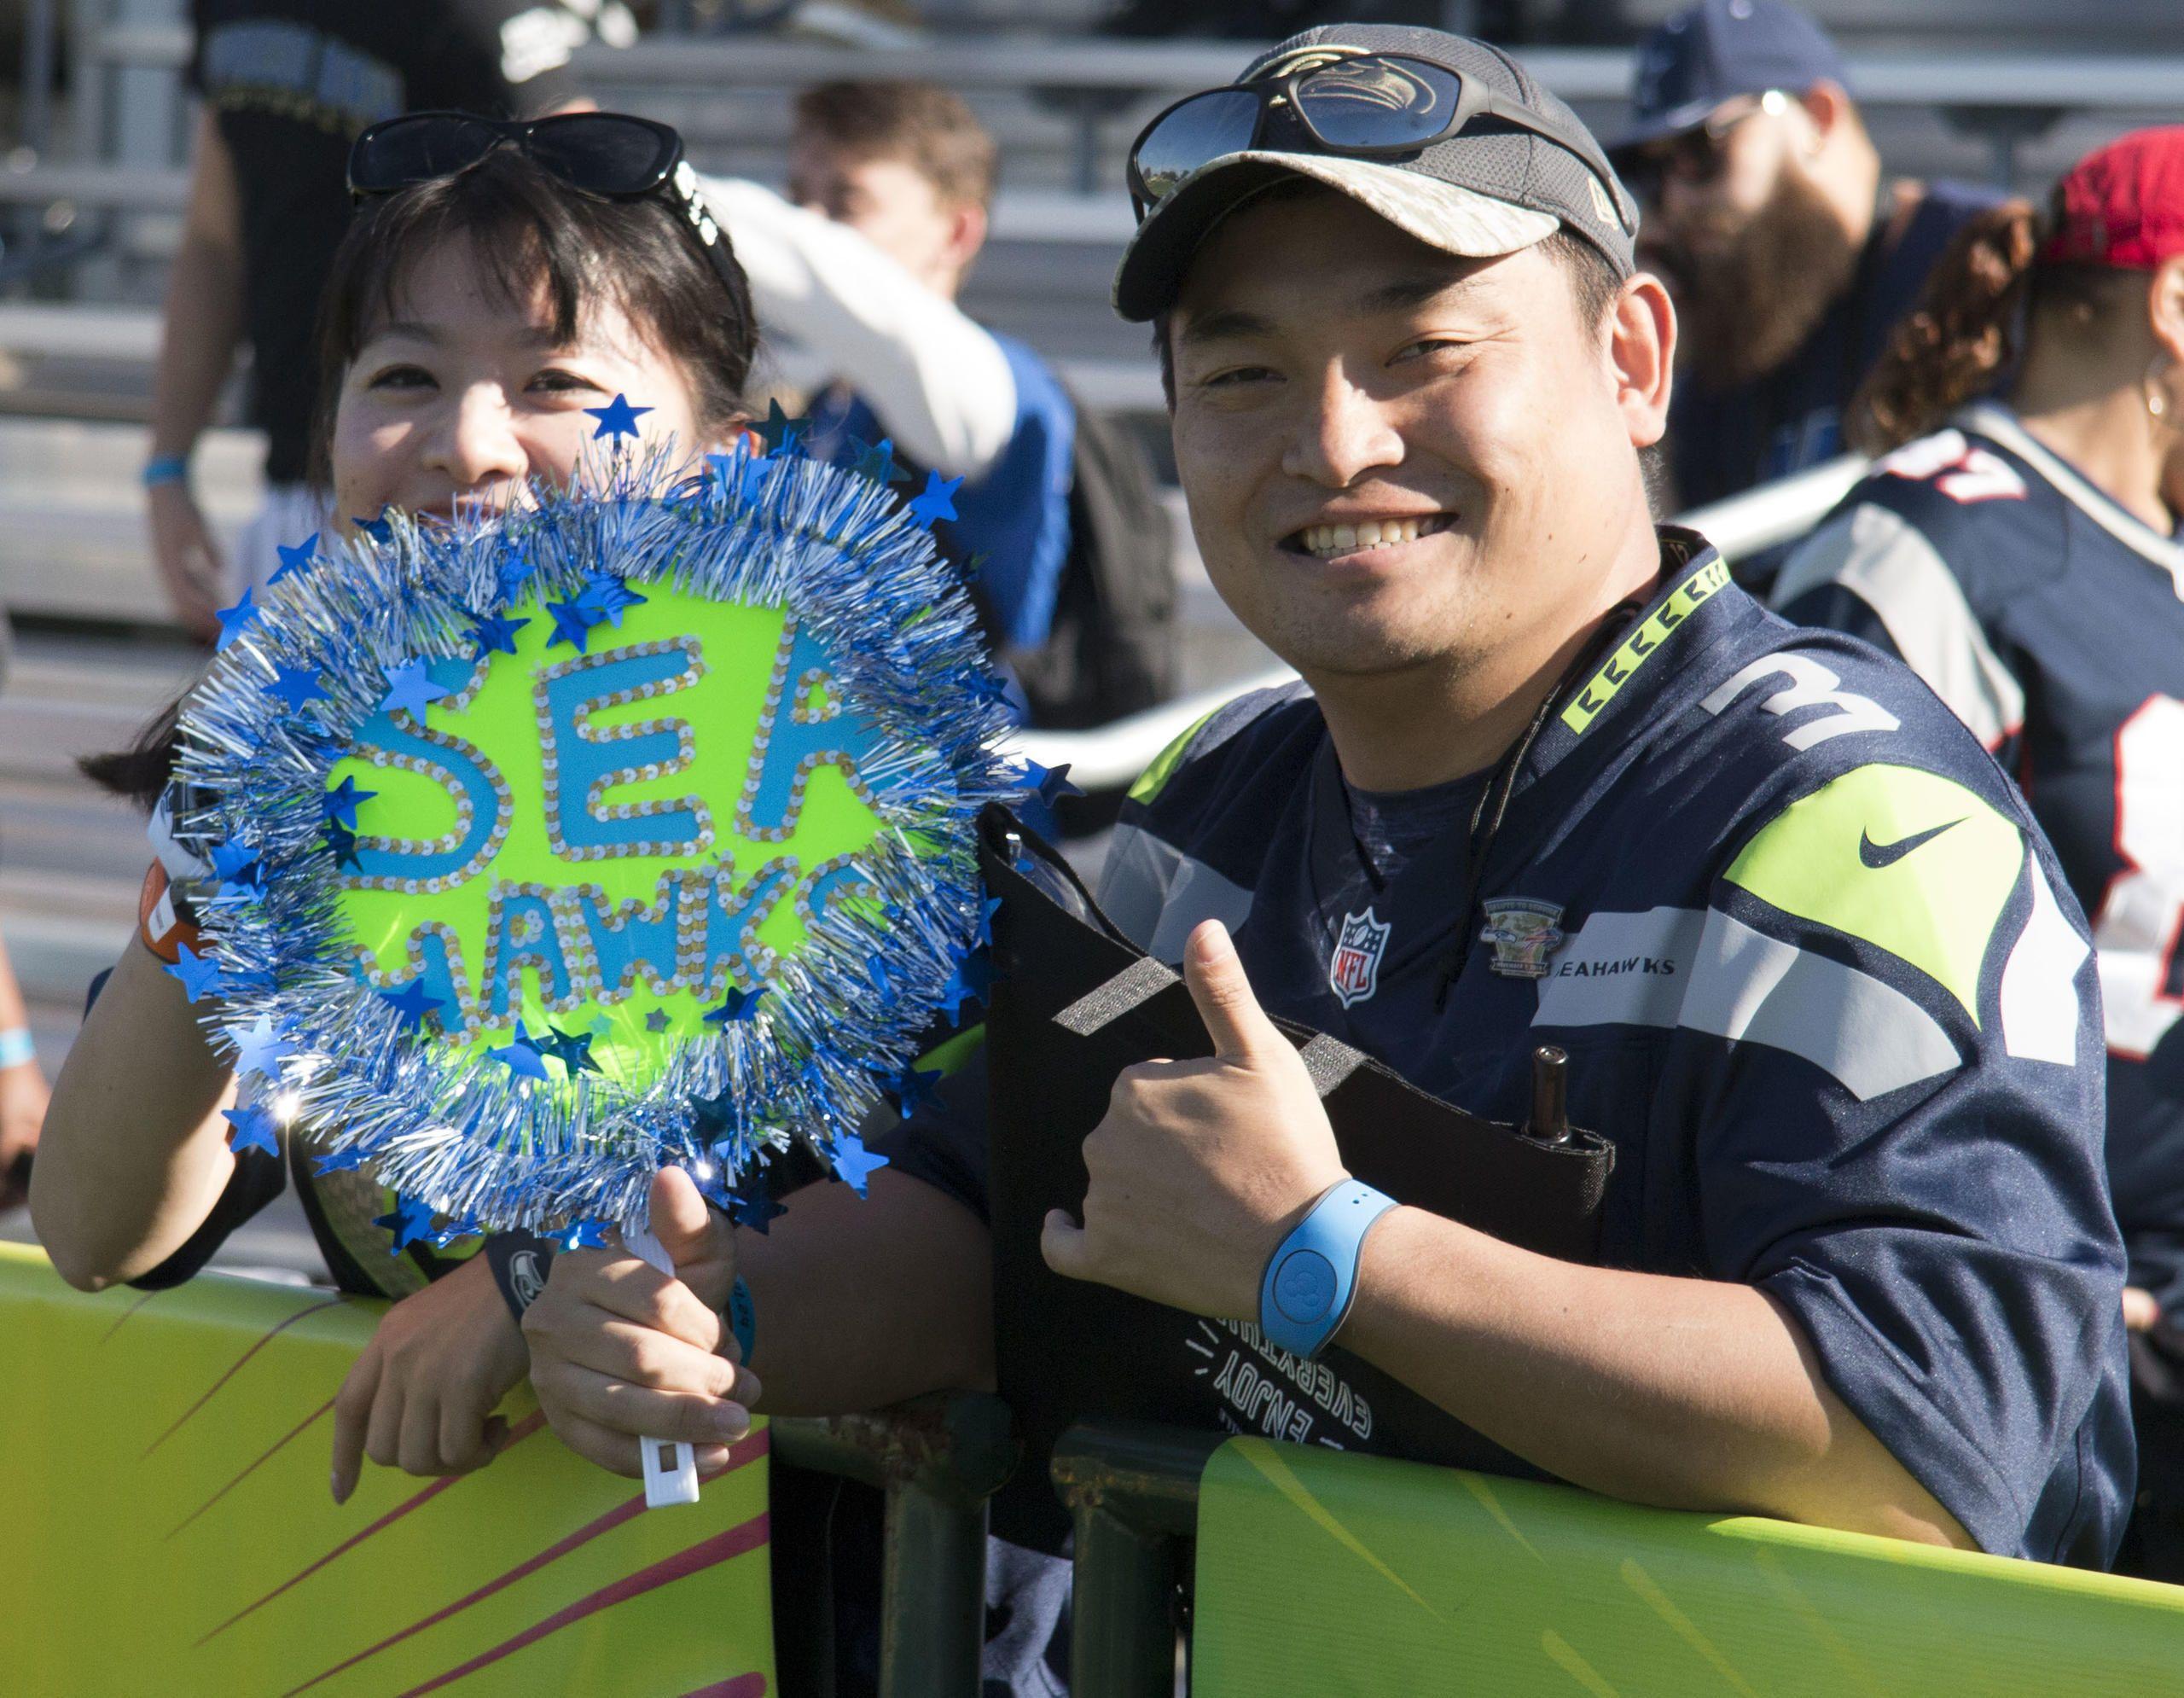 12s At The 2018 Pro Bowl: Day 1